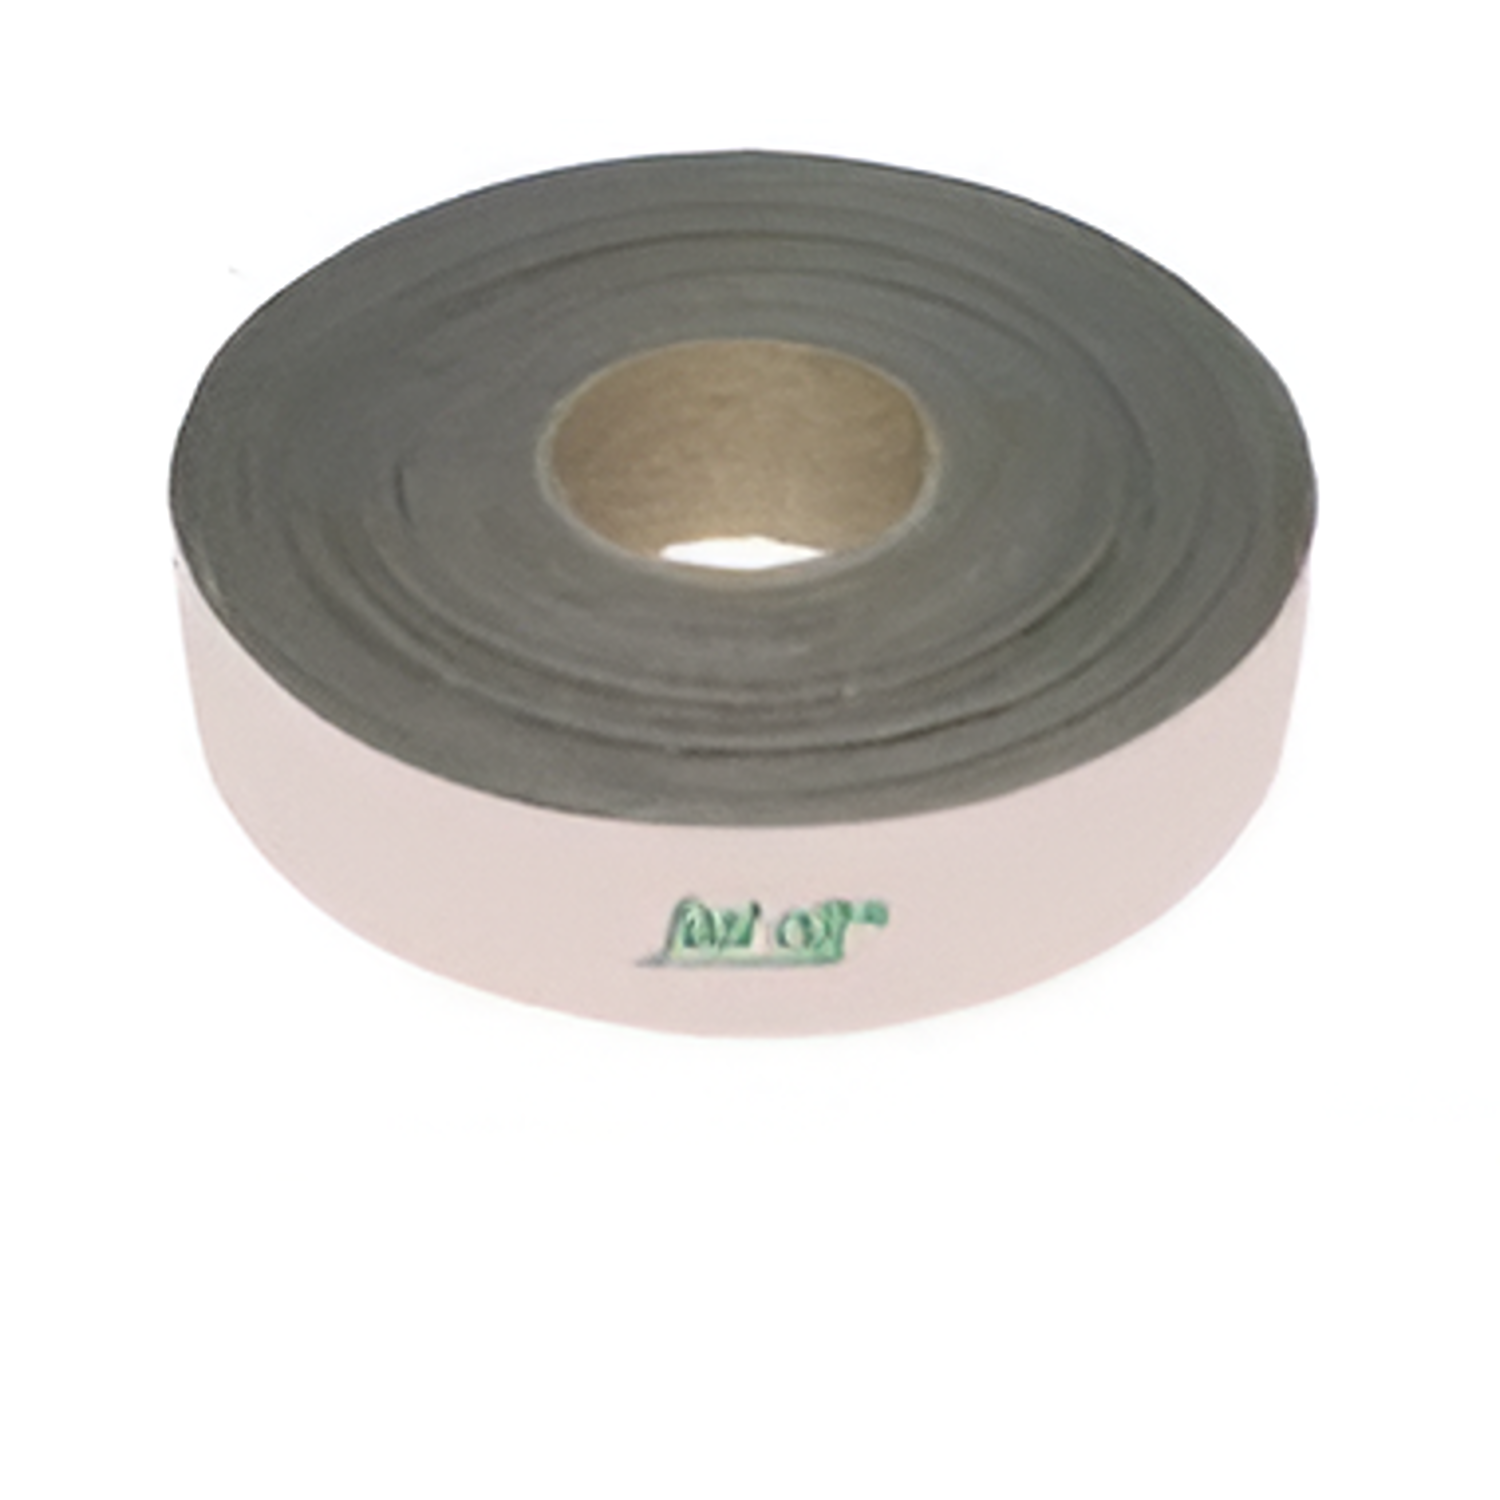 YEW AIK AE00407 Fast Cut Emery Roll (YEW AIK Tools) - Premium Emery Roll from YEW AIK - Shop now at Yew Aik.